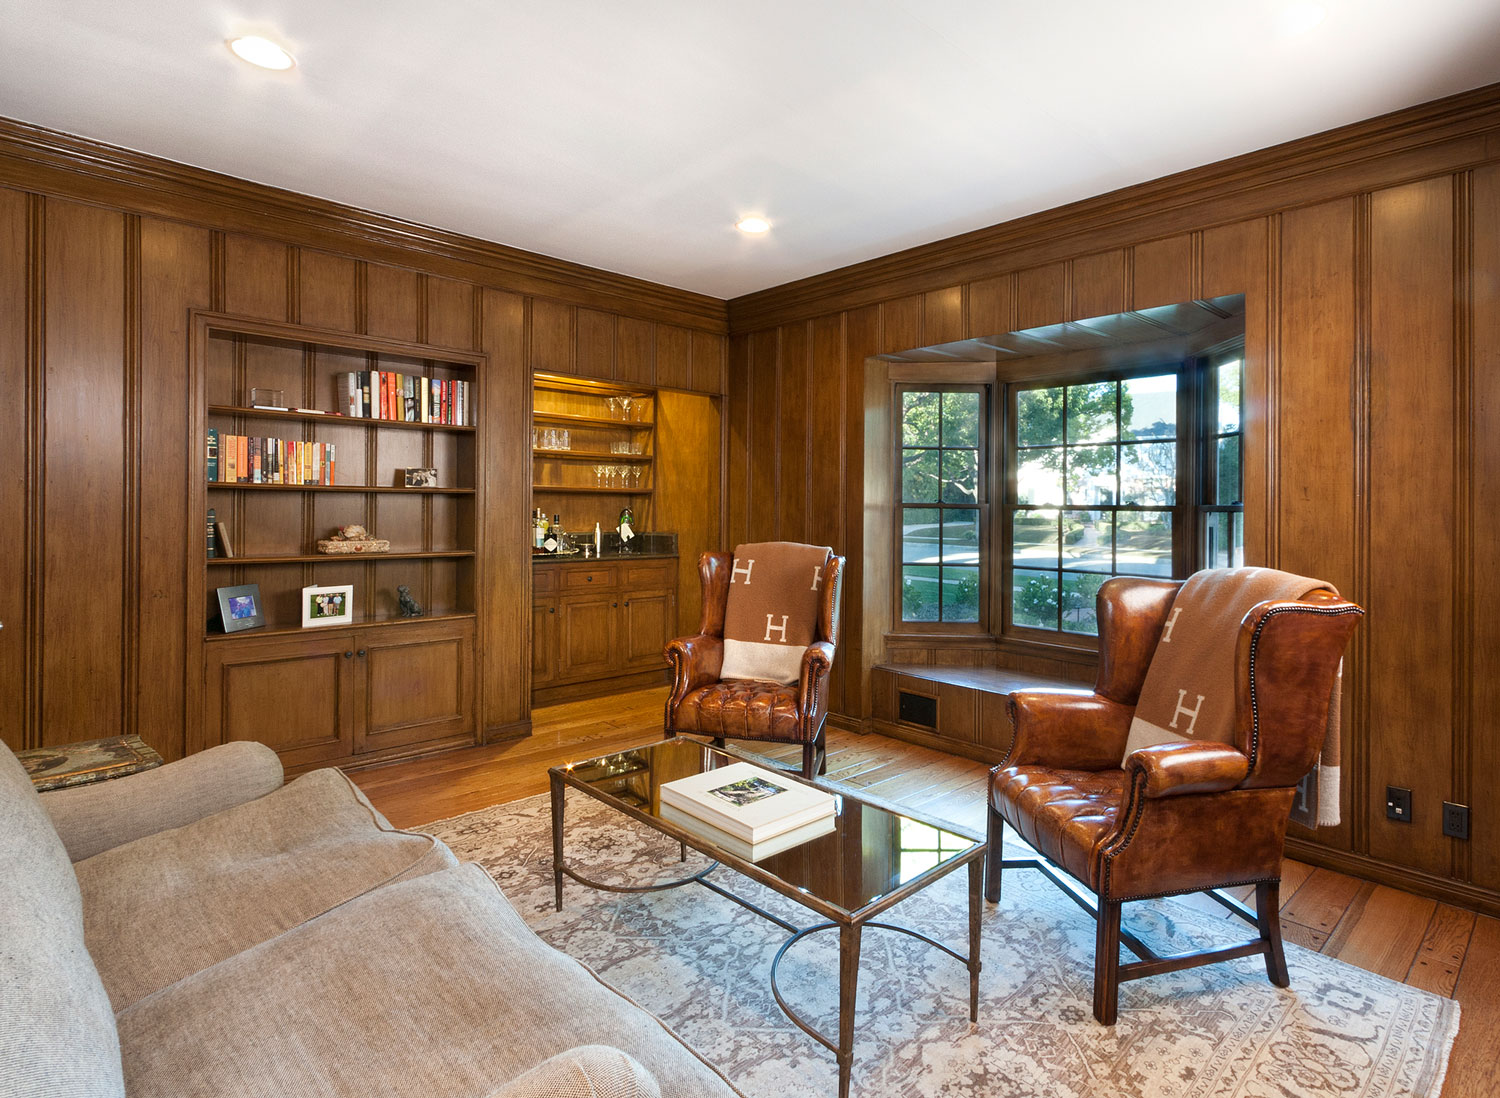 07-wood-paneled-home-office-built-in-shelves-window-seat-gary-drake-general-contractor.jpg